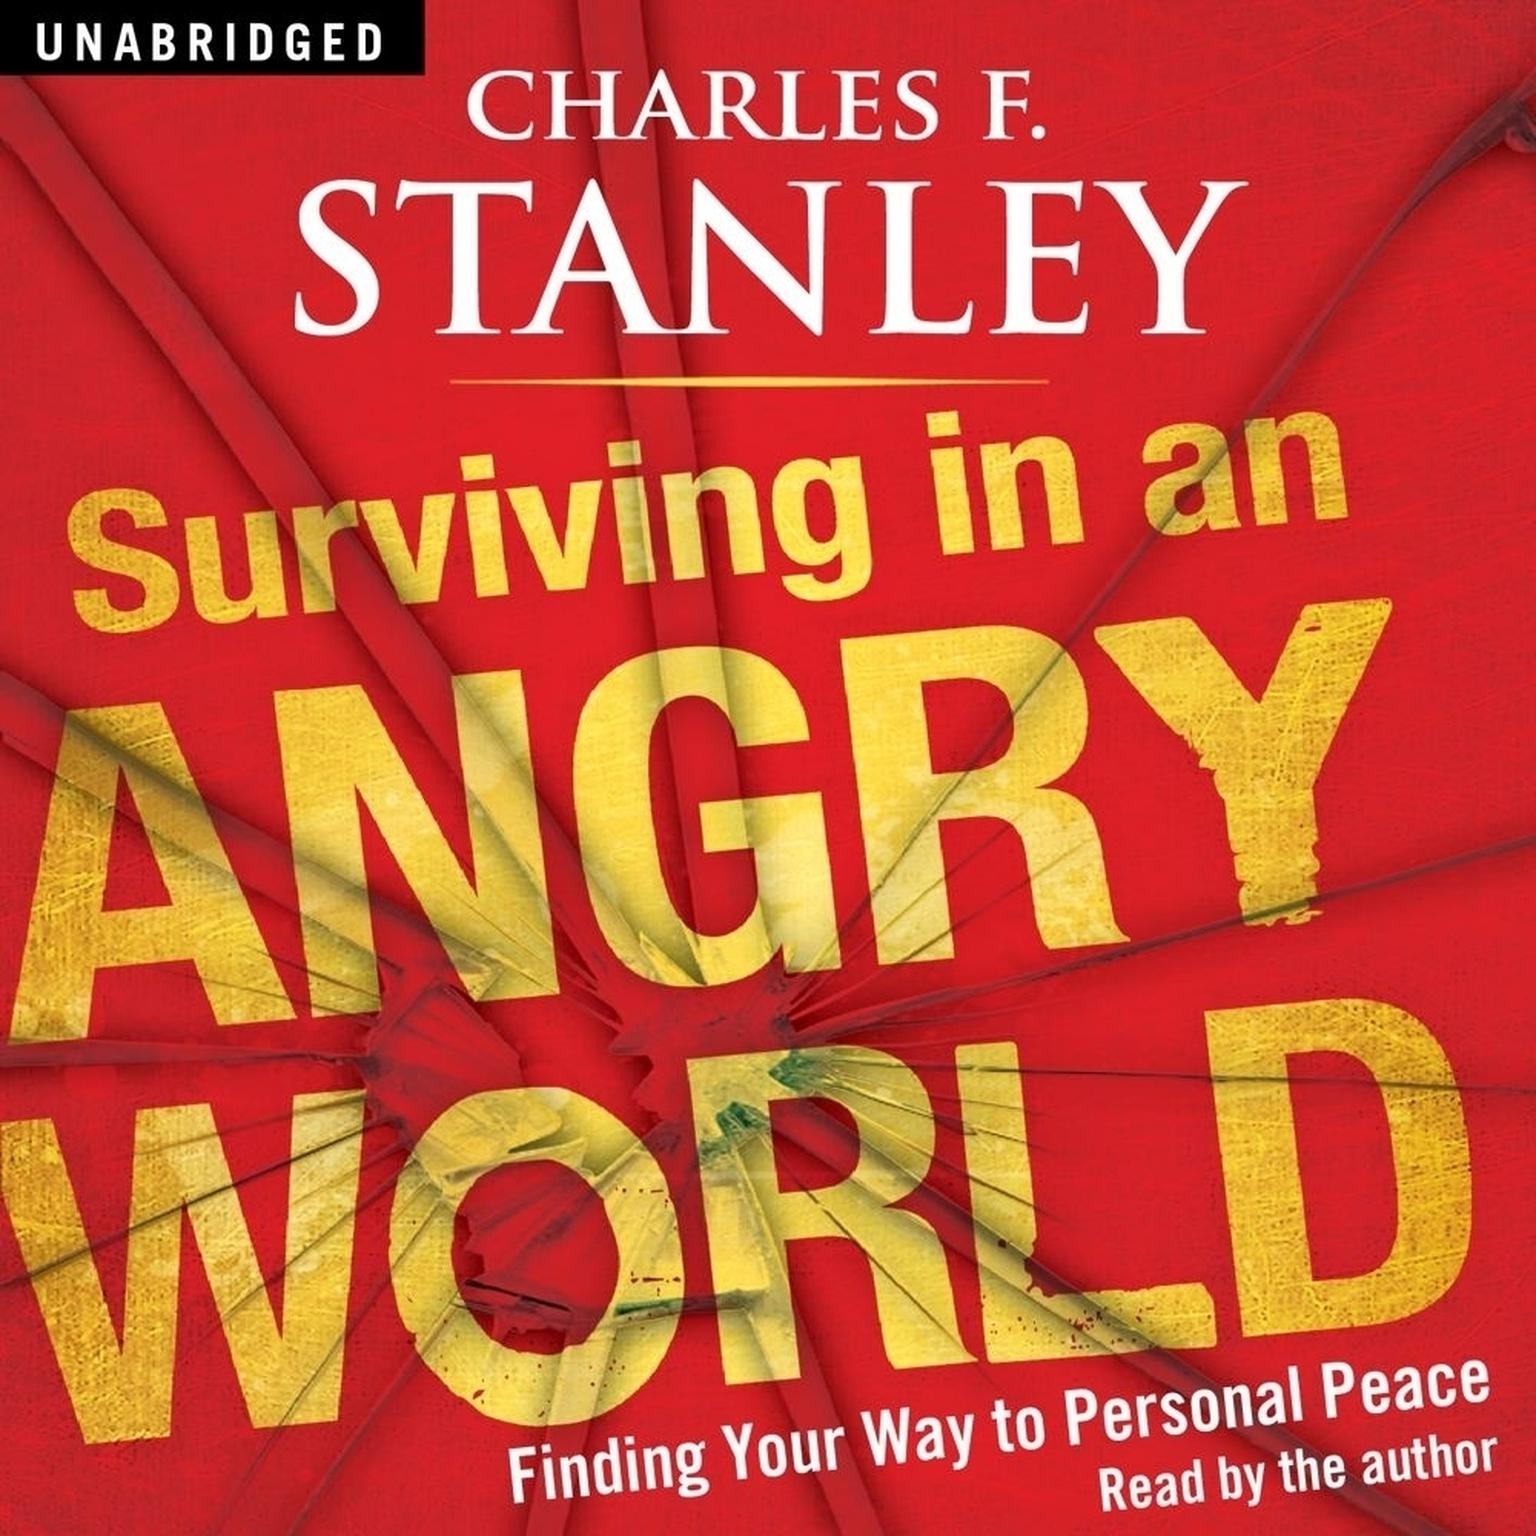 Surviving in an Angry World: Finding Your Way to Personal Peace Audiobook, by Charles F. Stanley